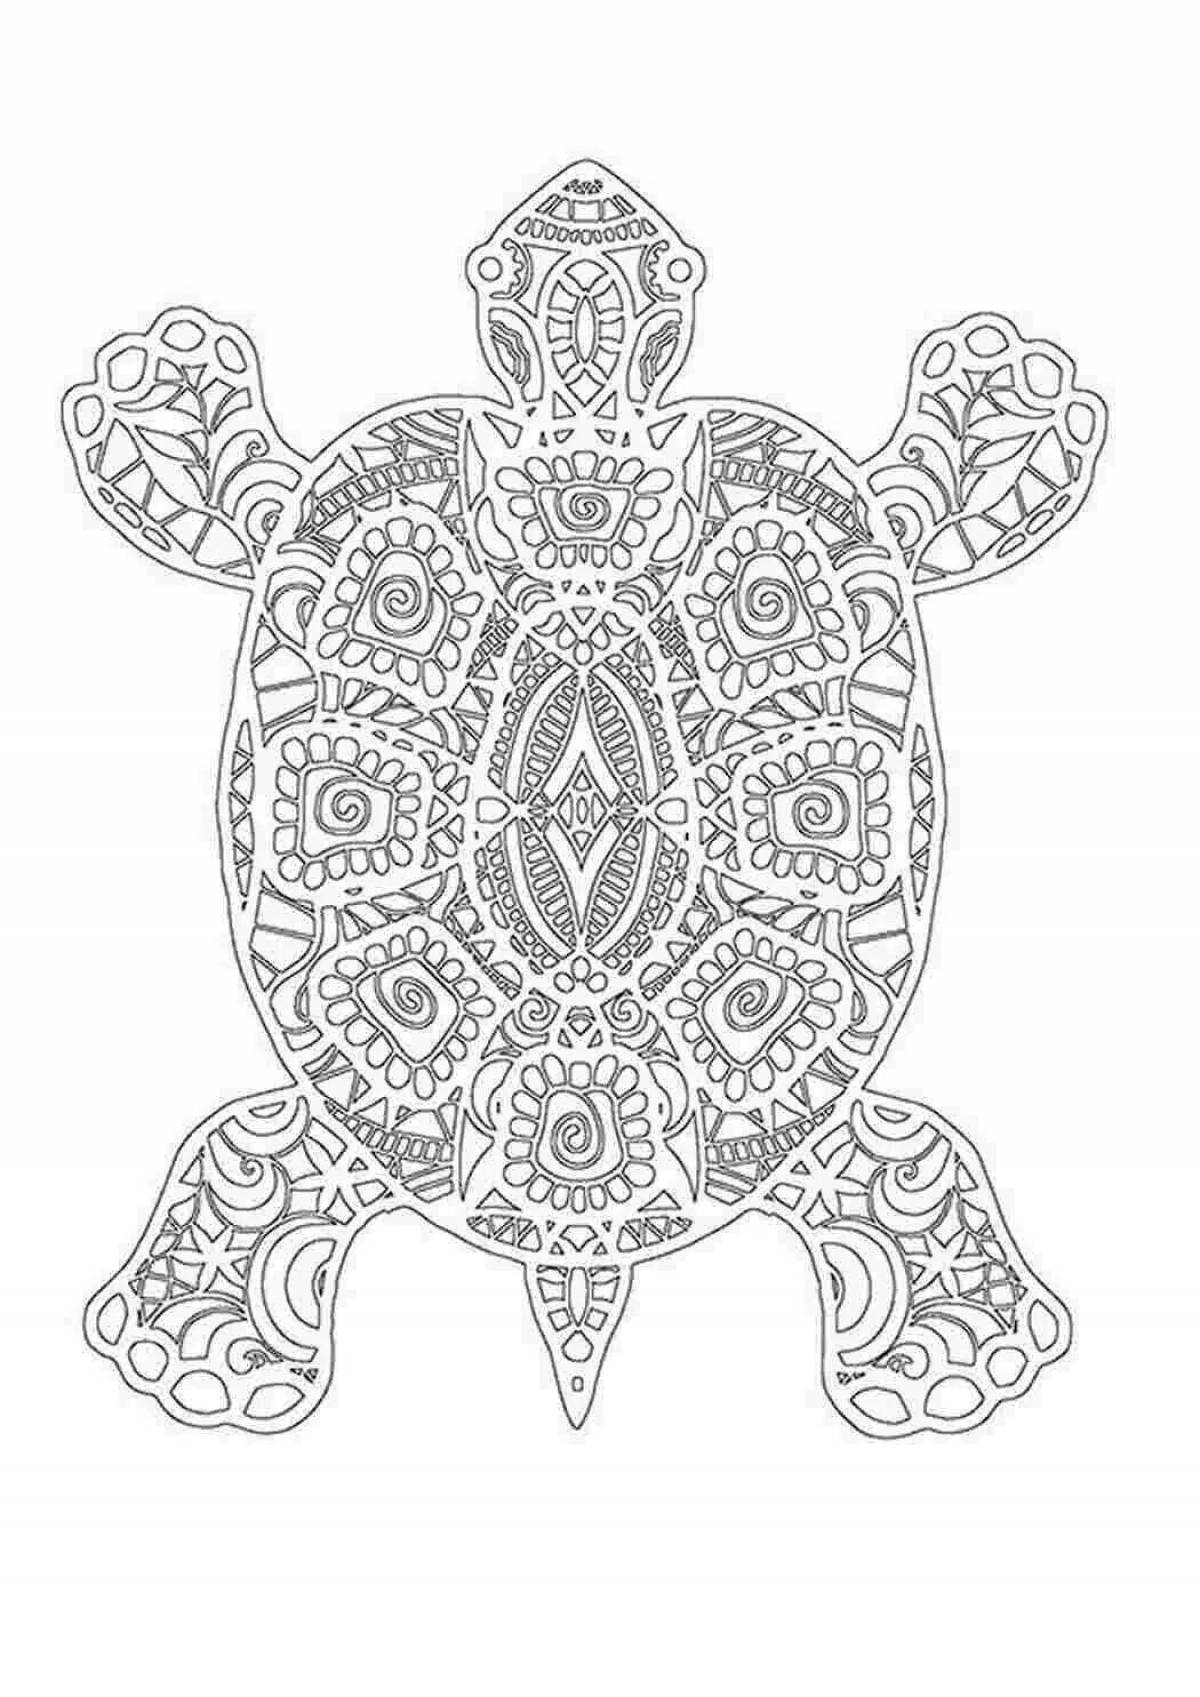 Inspirational relaxation coloring book for kids